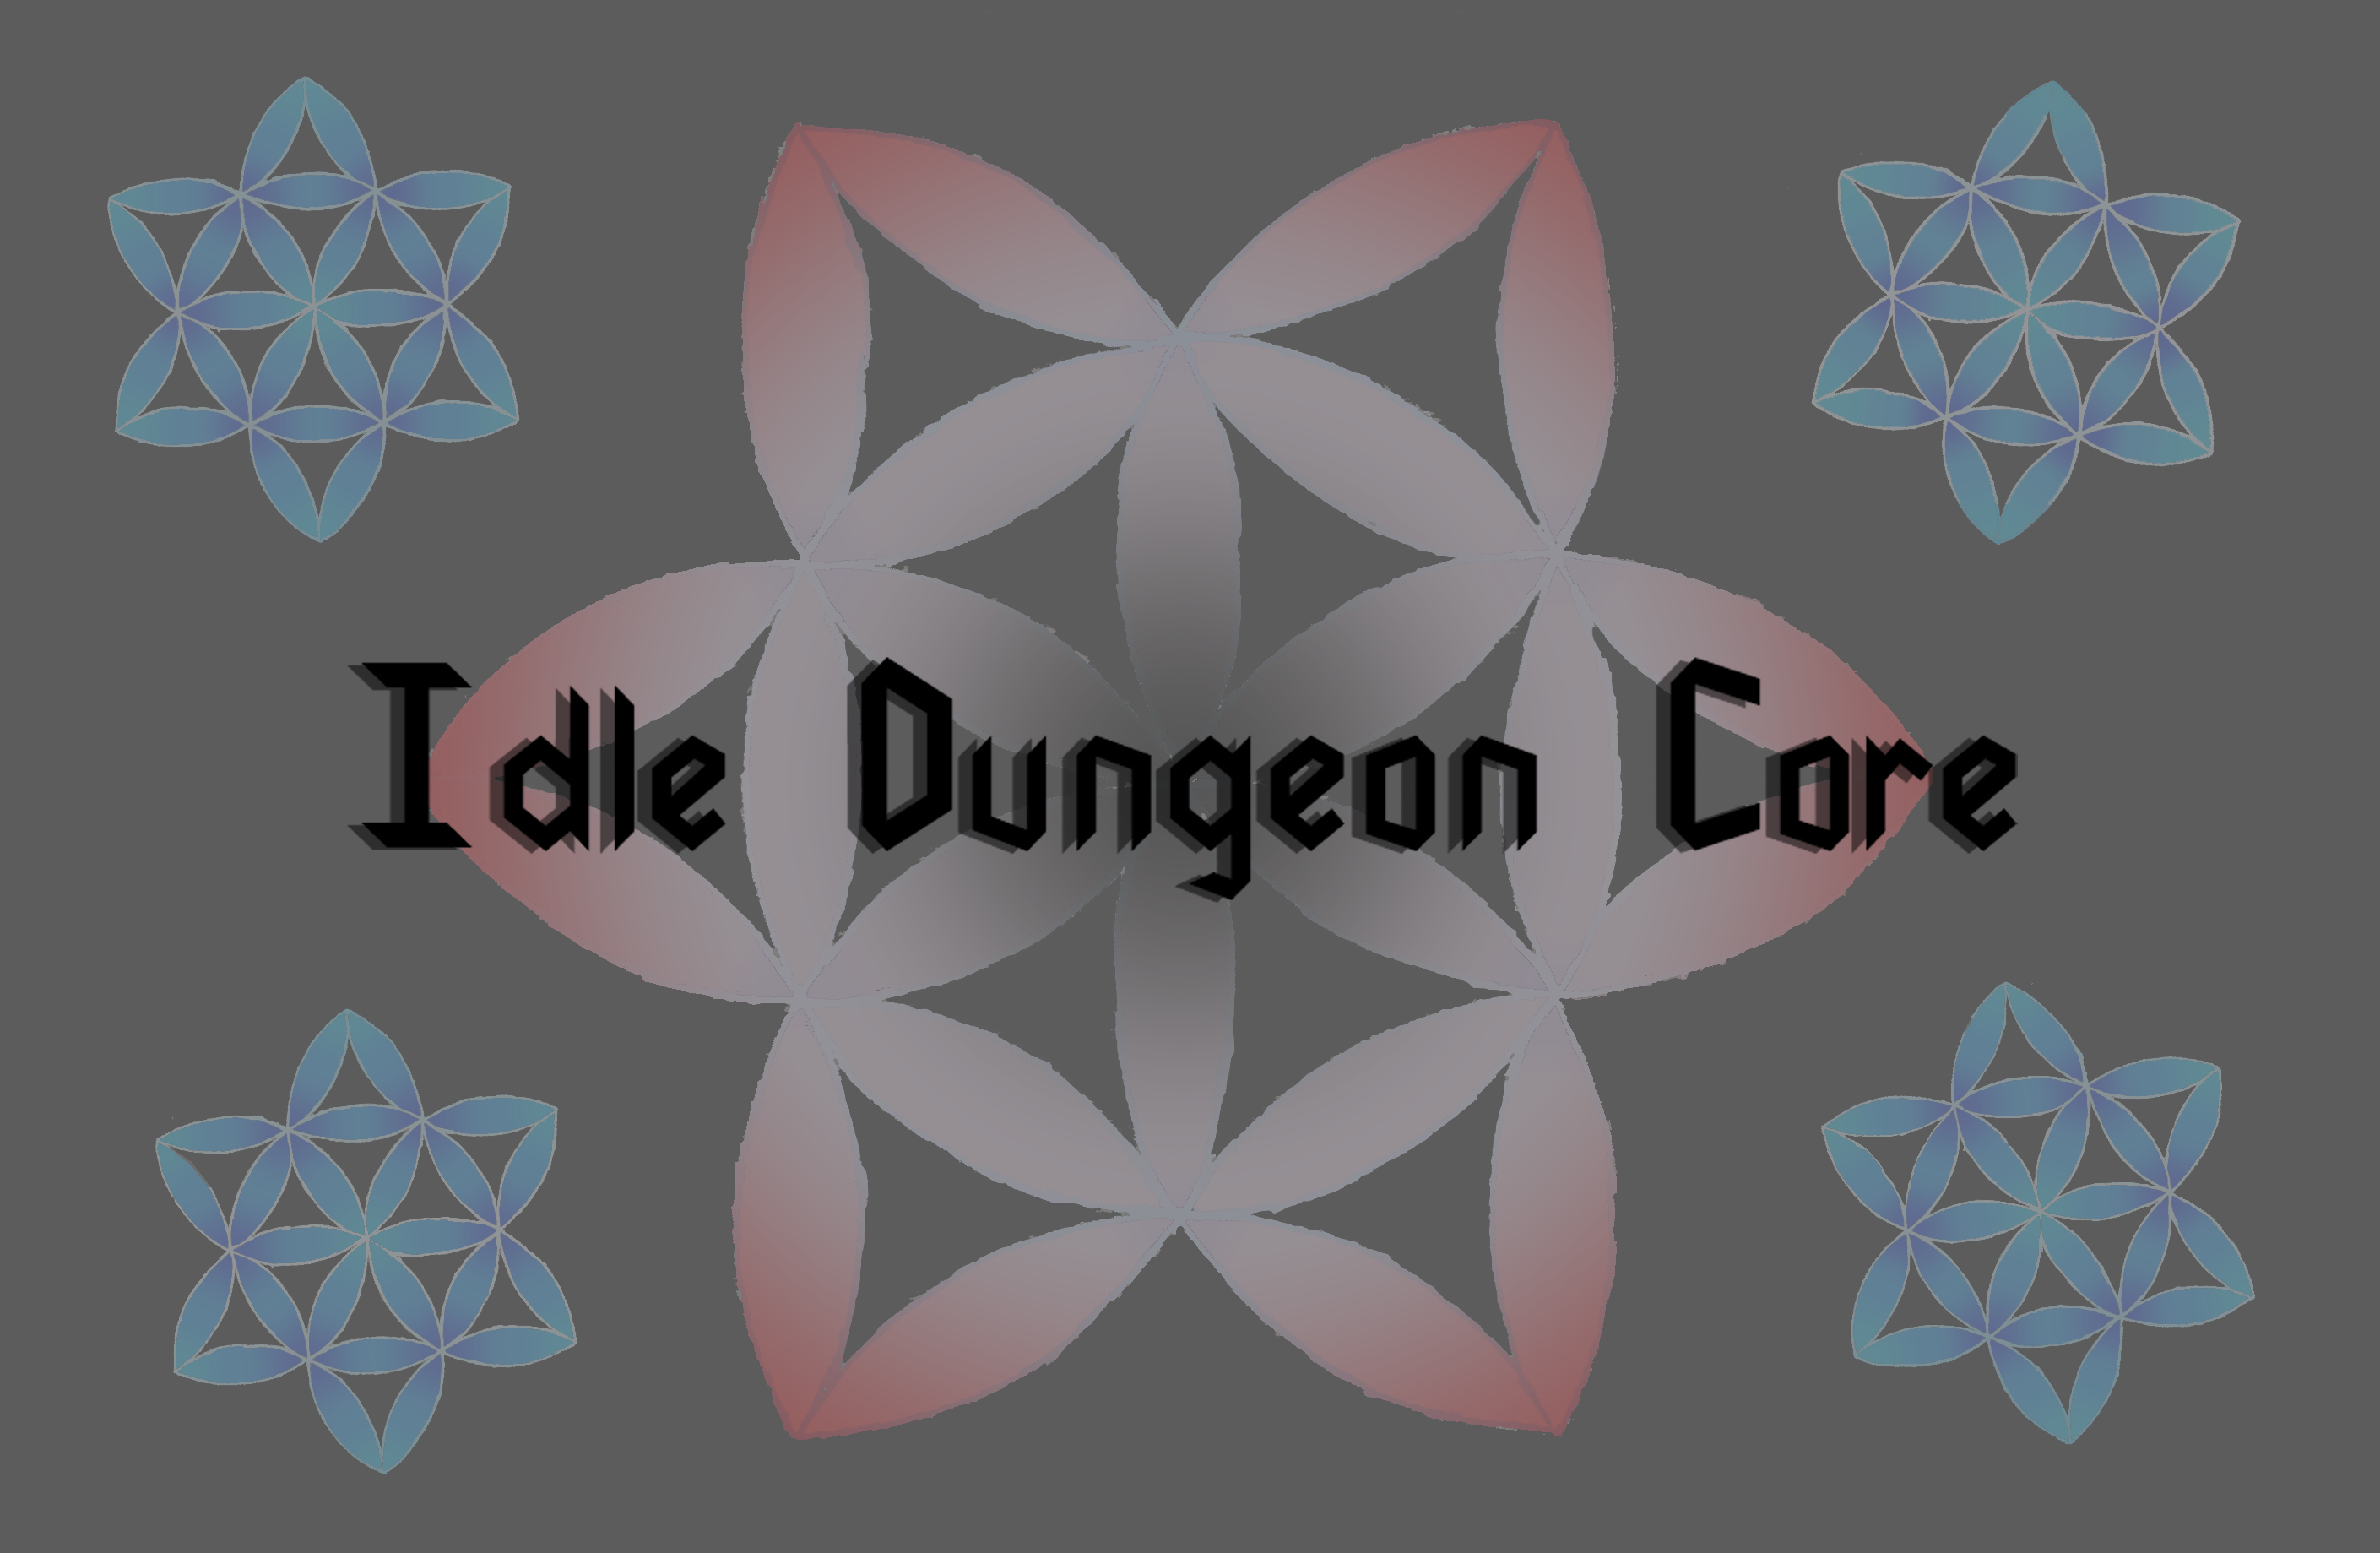 Idle Dungeon Core